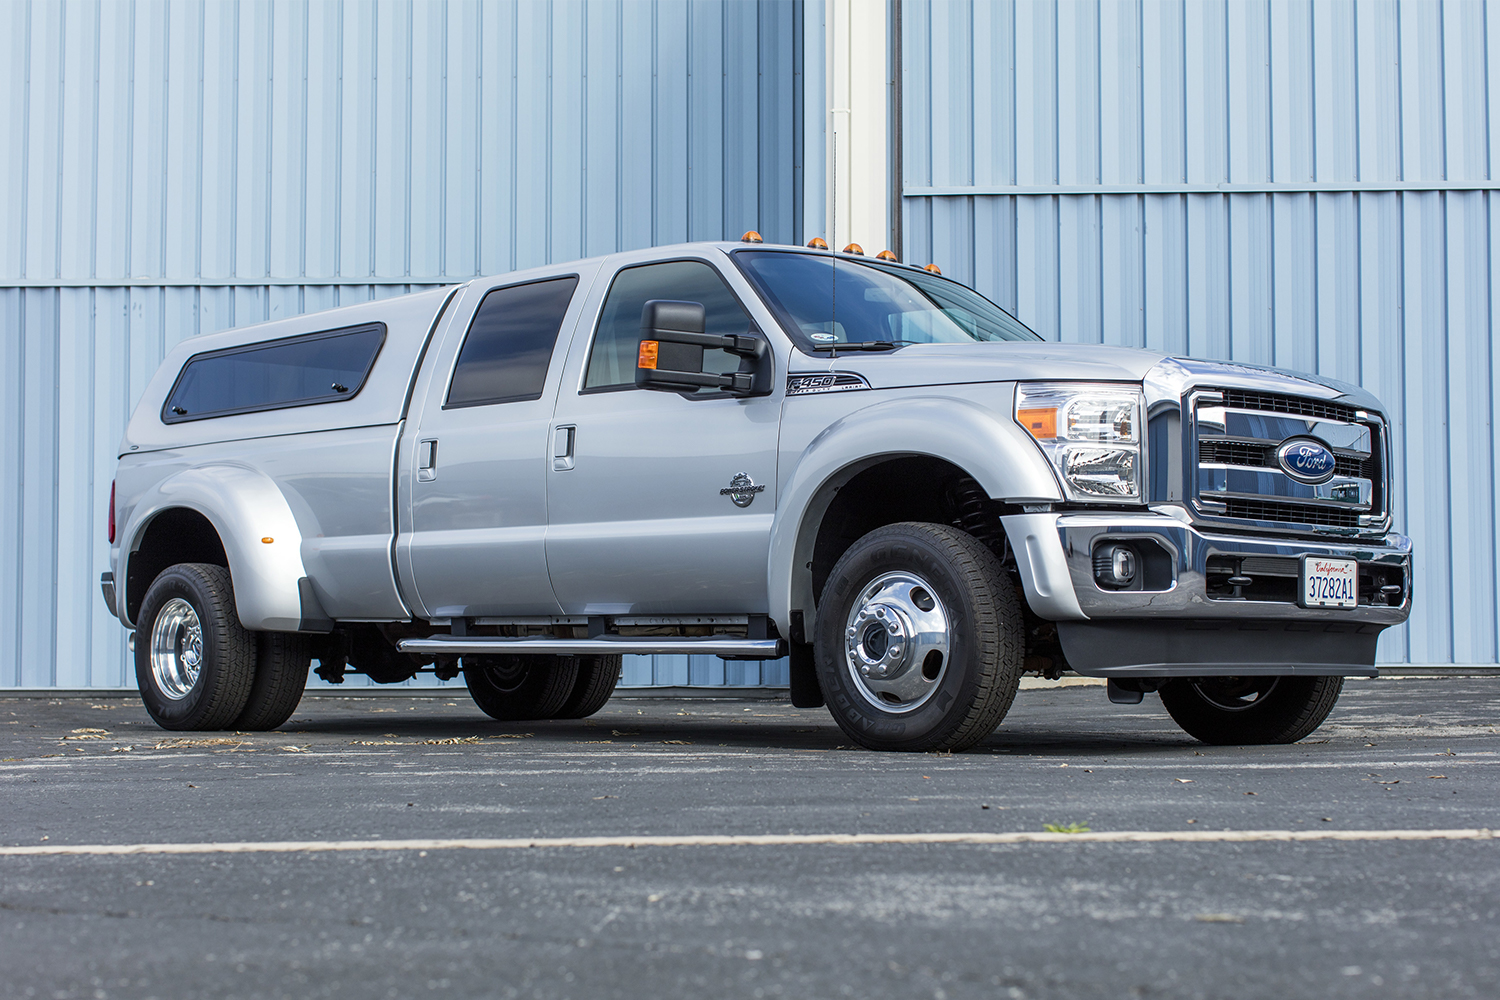 The 2011 Ford F-450 Super Duty Crew Cab Lariat Pickup owned by Tom Hanks. It will sell at the Bonhams Quail Lodge Auction as part of Monterey Car Week.